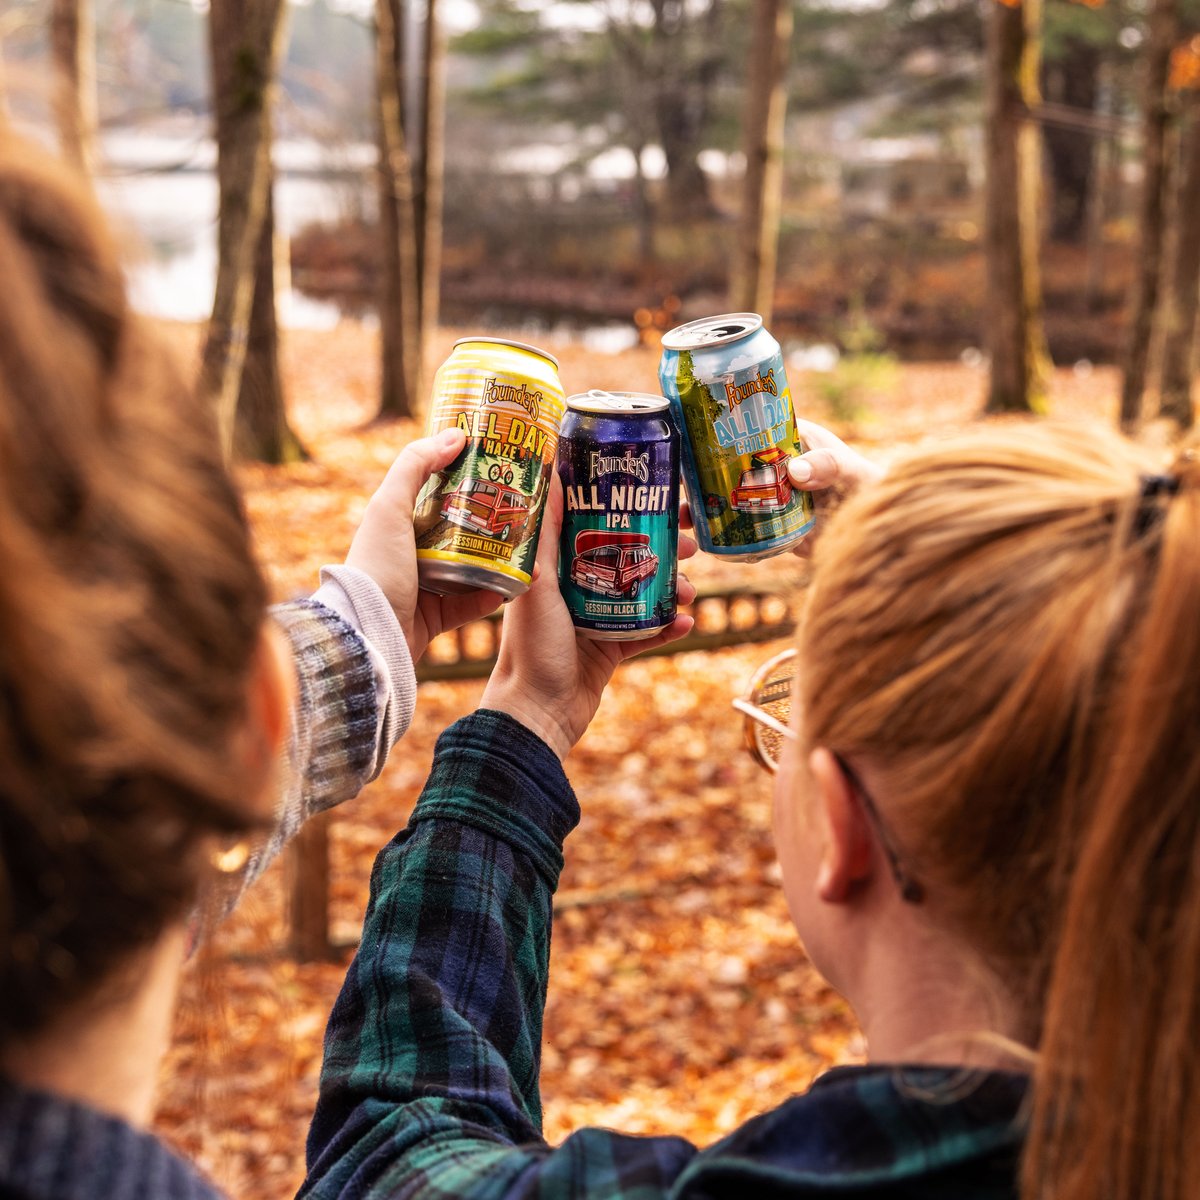 Beer tastes better when you have people to share it with. Remember to tag us in your All Day IPA inspired adventures so we can see all the ways you're savoring the moment! Cheers to the weekend! #foundersbrewing